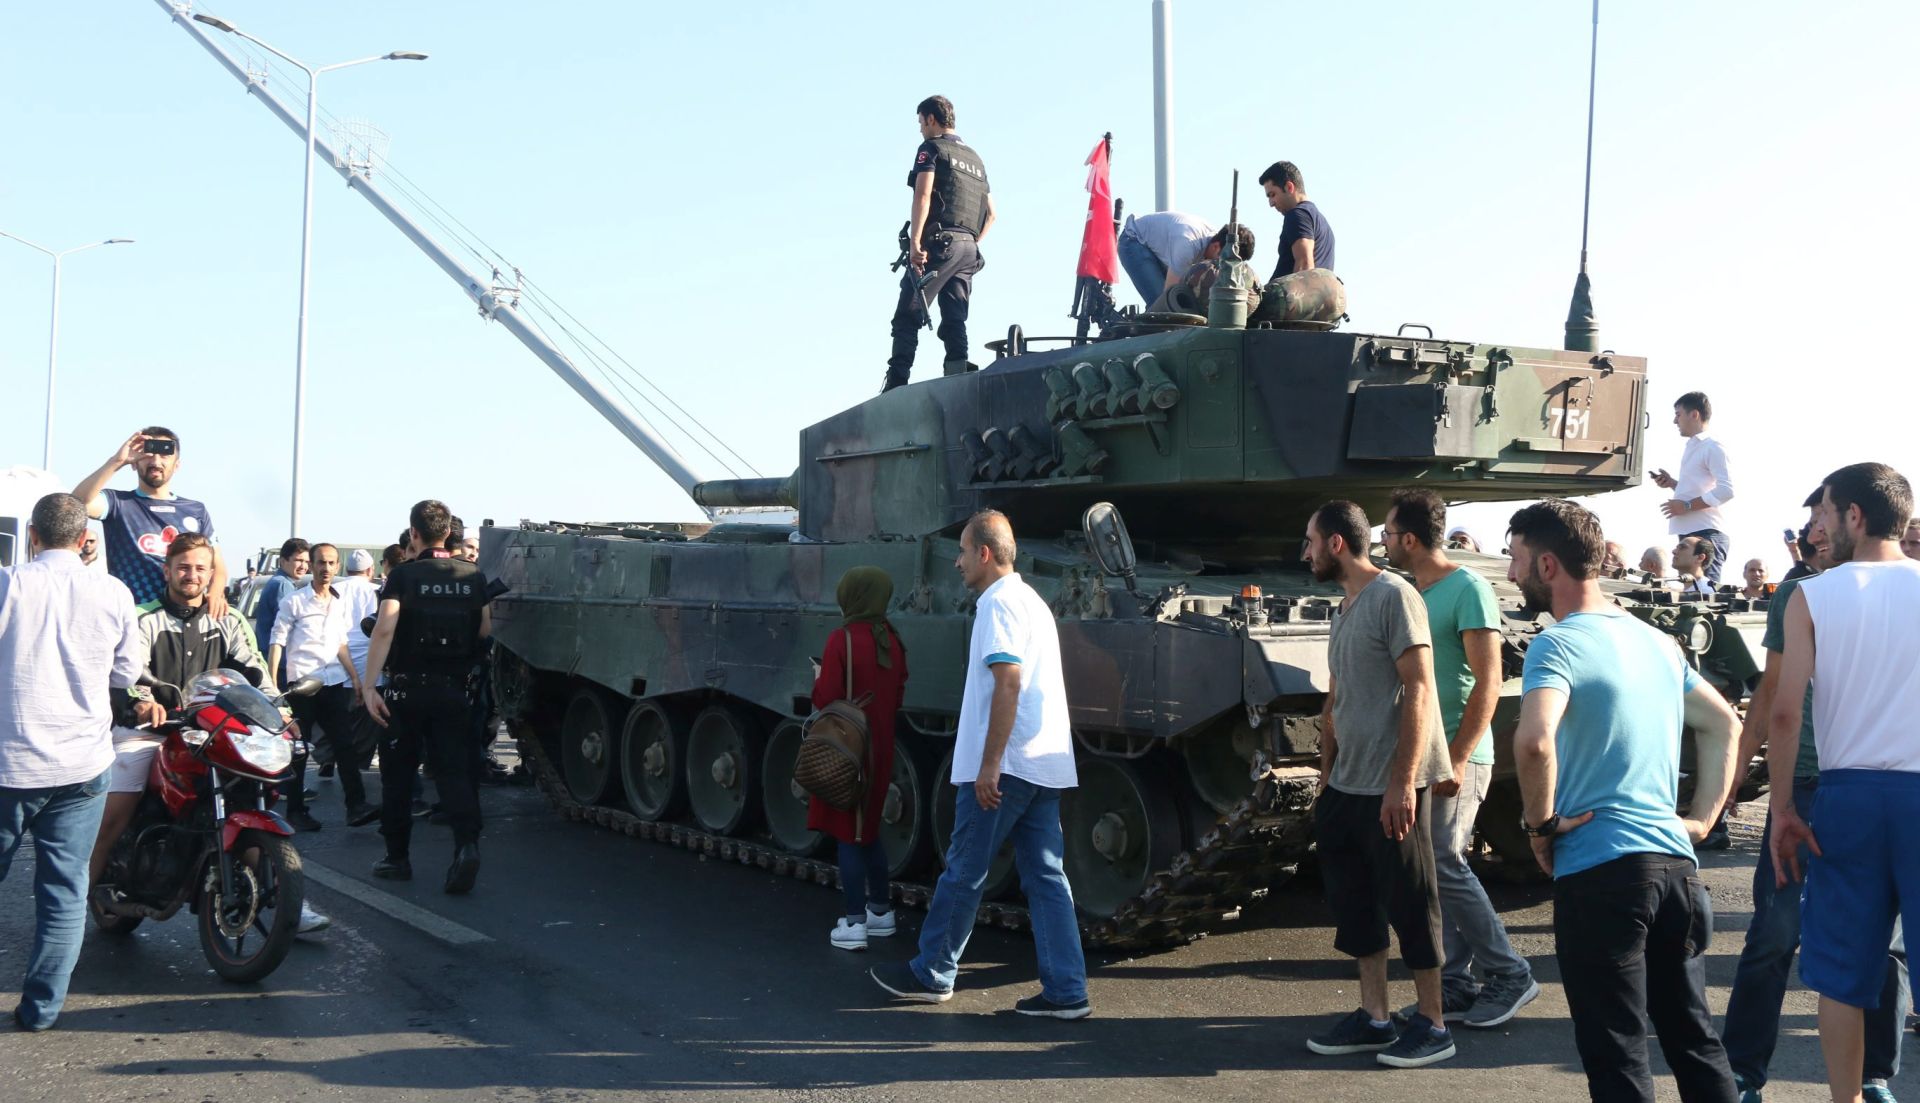 epa05427493 Turkish police and supporters of President Recep Tayyip Erdogan gather around a military tank on the Bosphorus Bridge after a failed coup attempt, in Istanbul, Turkey, 16 July 2016. Turkish Prime Minister Yildirim reportedly said that the Turkish military was involved in an attempted coup d'etat. The Turkish military meanwhile stated it had taken over control. According to news reports, Turkish President Recep Tayyip Erdogan has denounced the coup attempt as an 'act of treason' and insisted his government remains in charge. Some 104 coup plotters were killed, 90 people - 41 of them police and 47 are civilians - 'fell martrys', after an attempt to bring down the Turkish government, the acting army chief General Umit Dundar said in a televised appearance.  EPA/STR